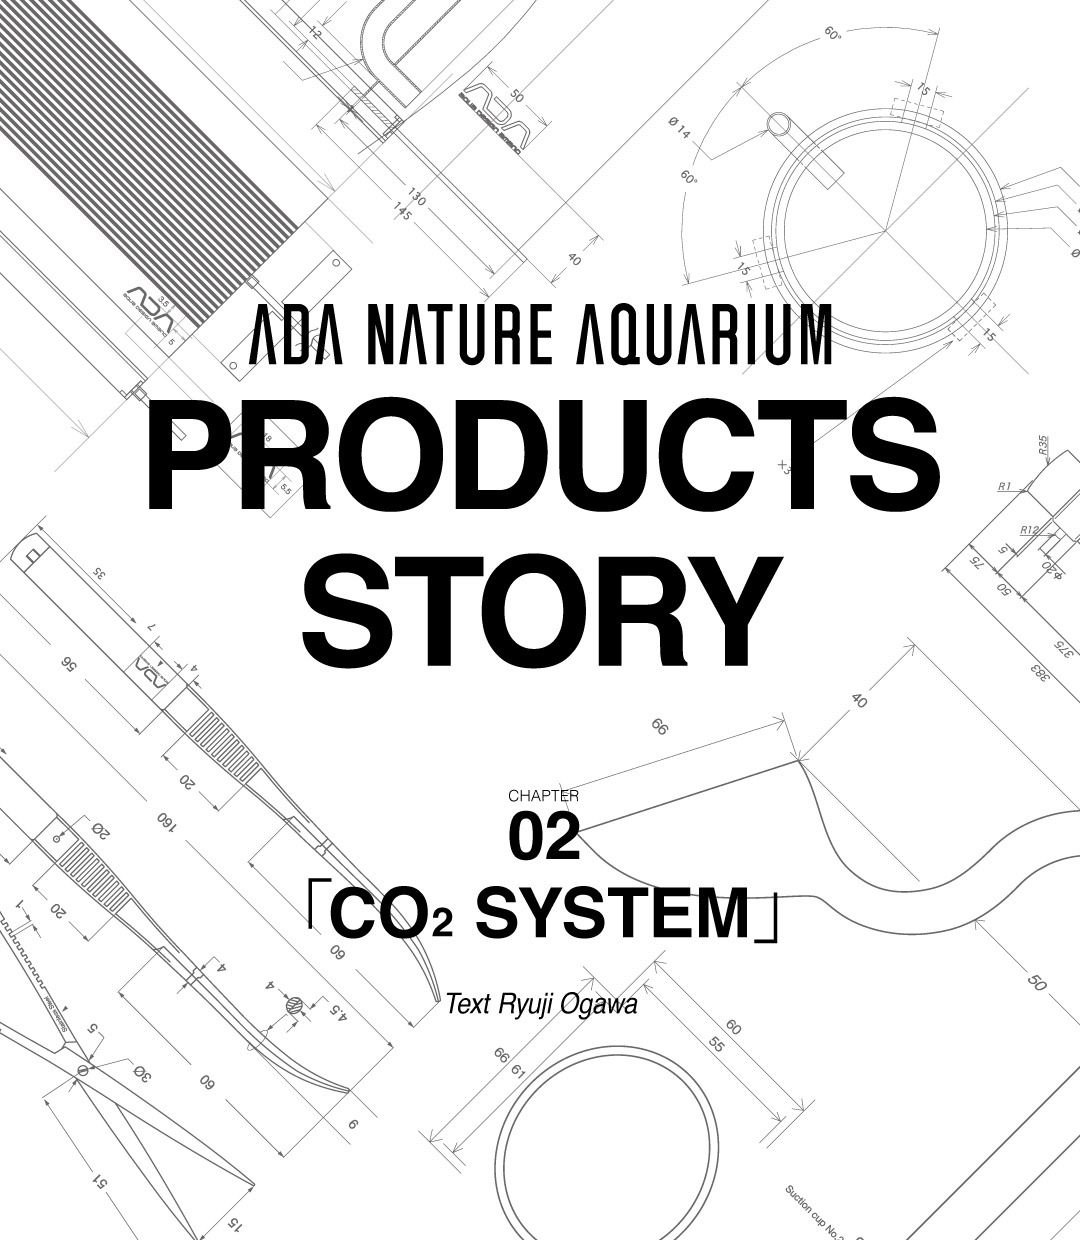 NA PRODUCTS STORY #02  CO2 SYSTEM